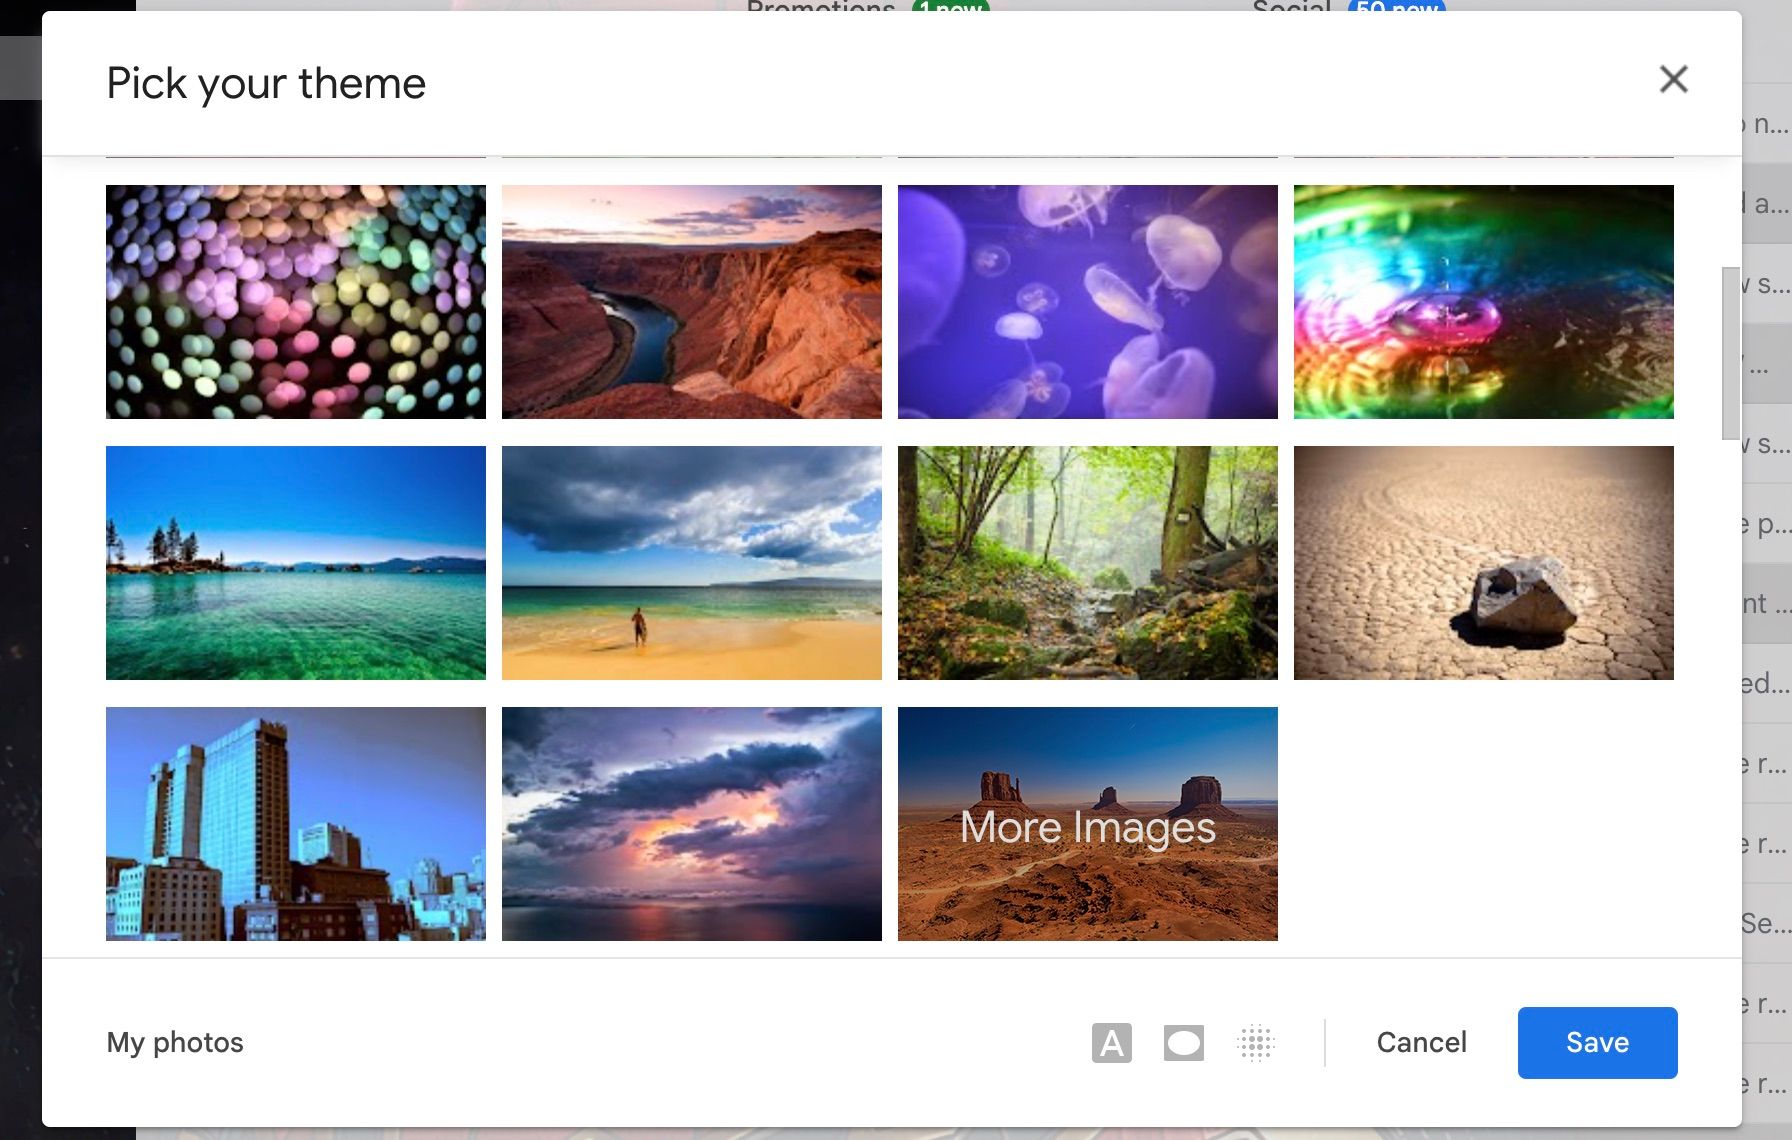 More Images button in the Gmail themes